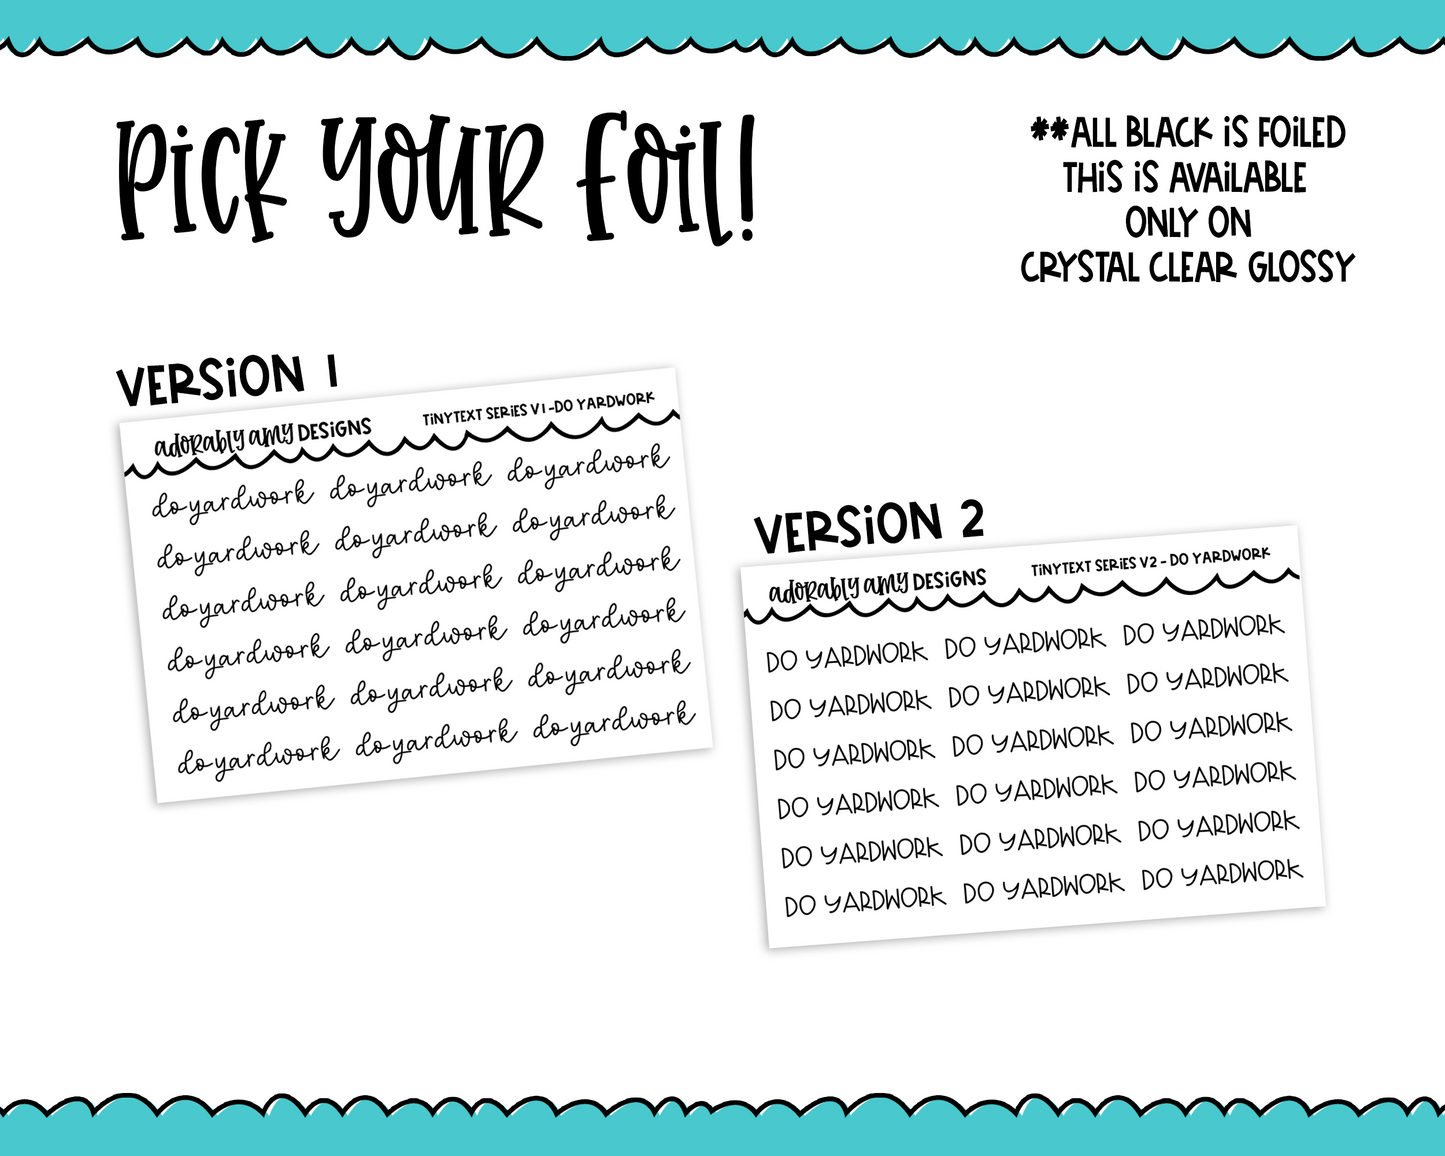 Foiled Tiny Text Series - Do Yardwork Checklist Size Planner Stickers for any Planner or Insert